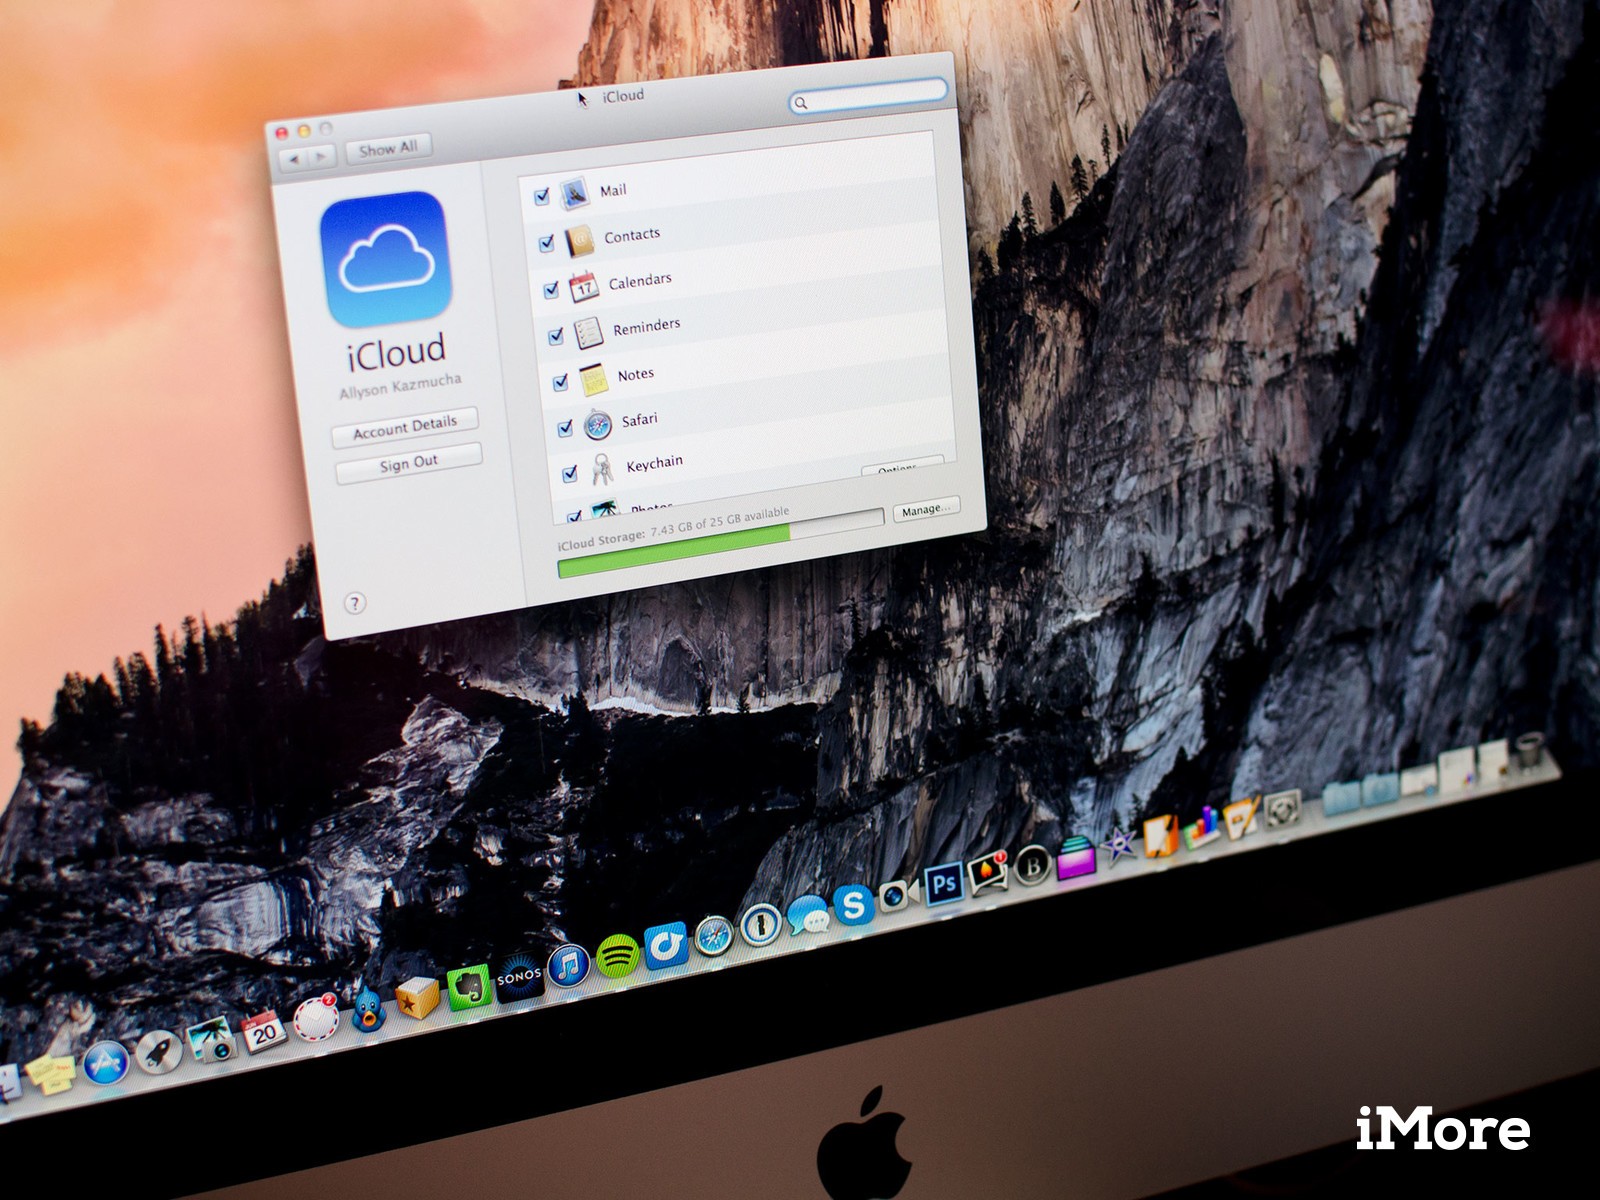 where can you find the setting to synchronize your email contacts with contacts app? for mac